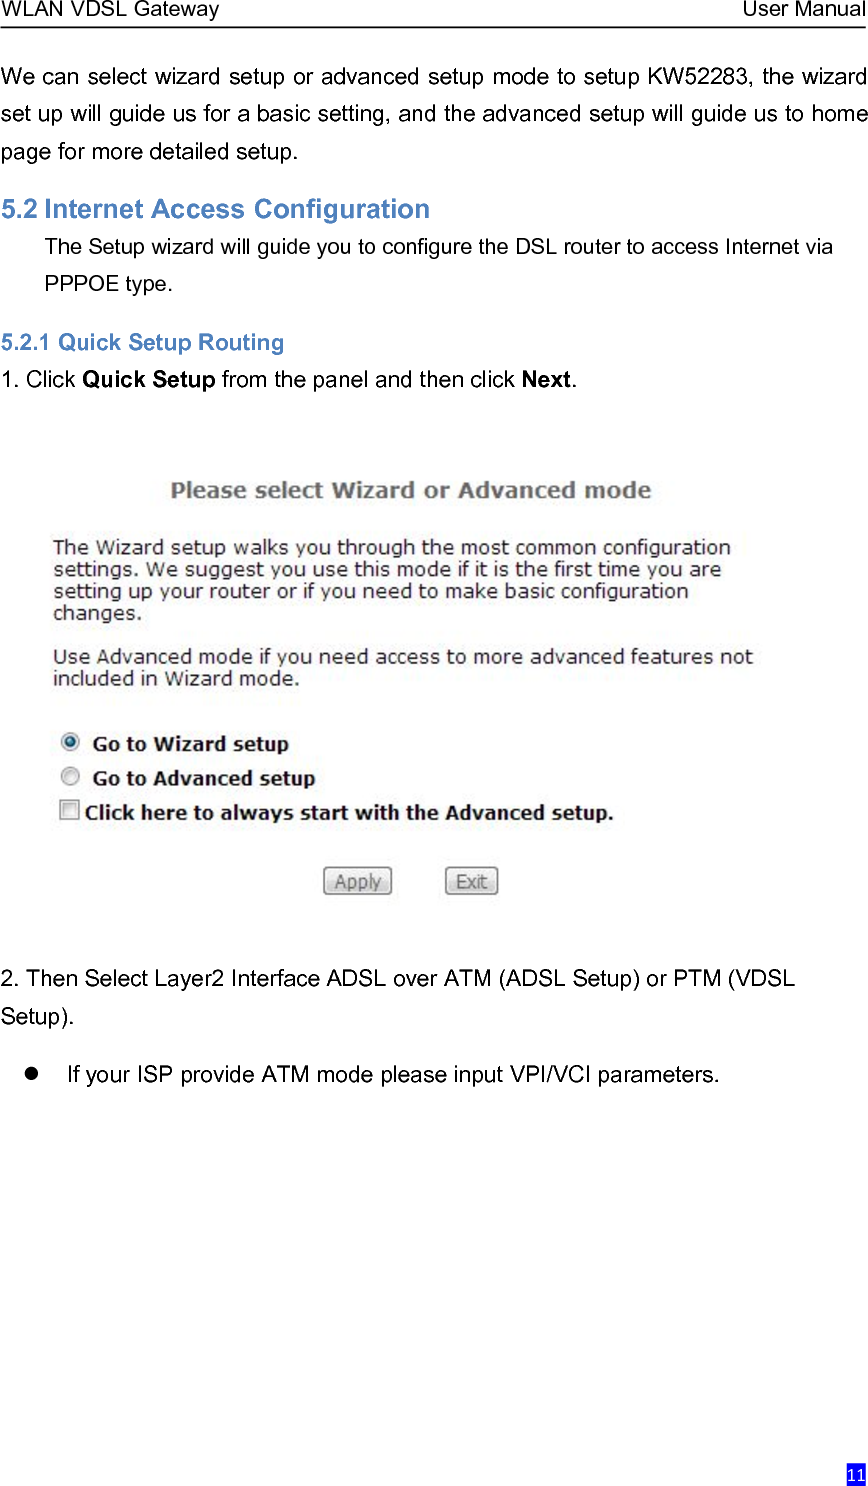 WLAN VDSL Gateway User Manual11We can select wizard setup or advanced setup mode to setup KW52283, the wizardset up will guide us for a basic setting, and the advanced setup will guide us to homepage for more detailed setup.5.2 Internet Access ConfigurationThe Setup wizard will guide you to configure the DSL router to access Internet viaPPPOE type.5.2.1 Quick Setup Routing1. Click Quick Setup from the panel and then click Next.2. Then Select Layer2 Interface ADSL over ATM (ADSL Setup) or PTM (VDSLSetup).If your ISP provide ATM mode please input VPI/VCI parameters.